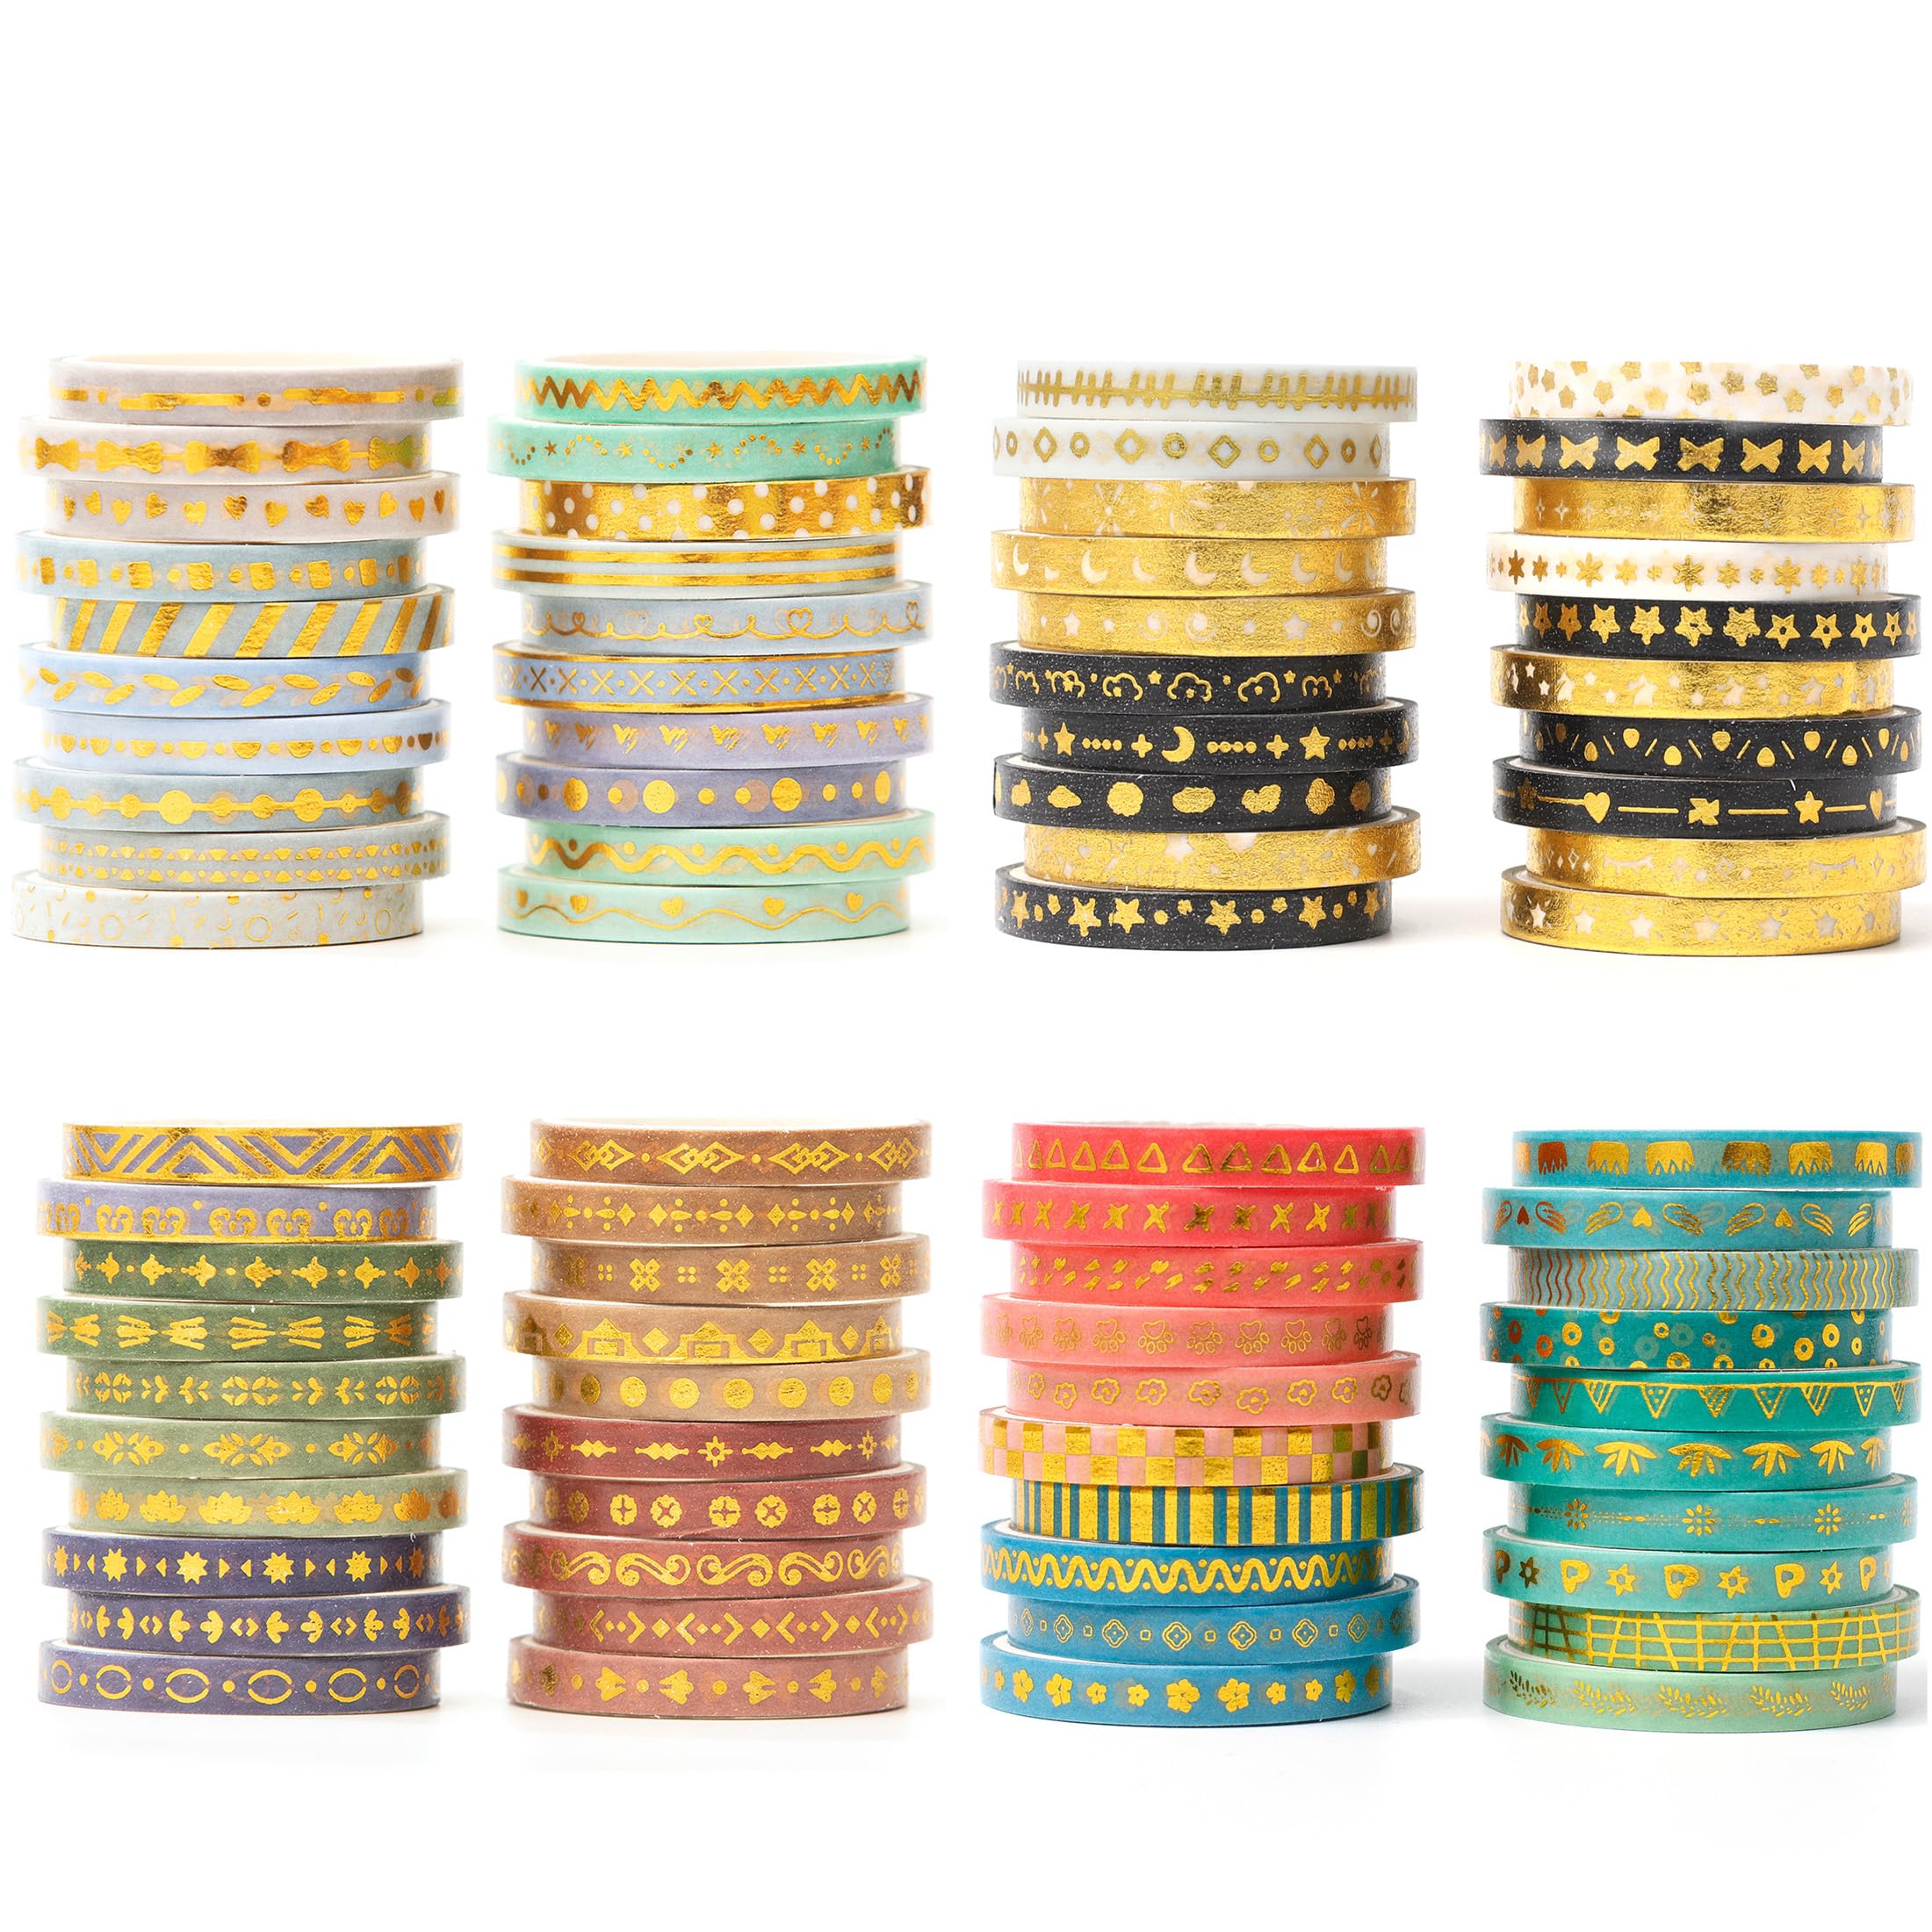 YUBX Skinny Gold Washi Tape Set 80 Rolls Basic Foil Print Decorative Masking Tapes for Arts, DIY Crafts, Journals, Planners, Scrapbook, Wrapping